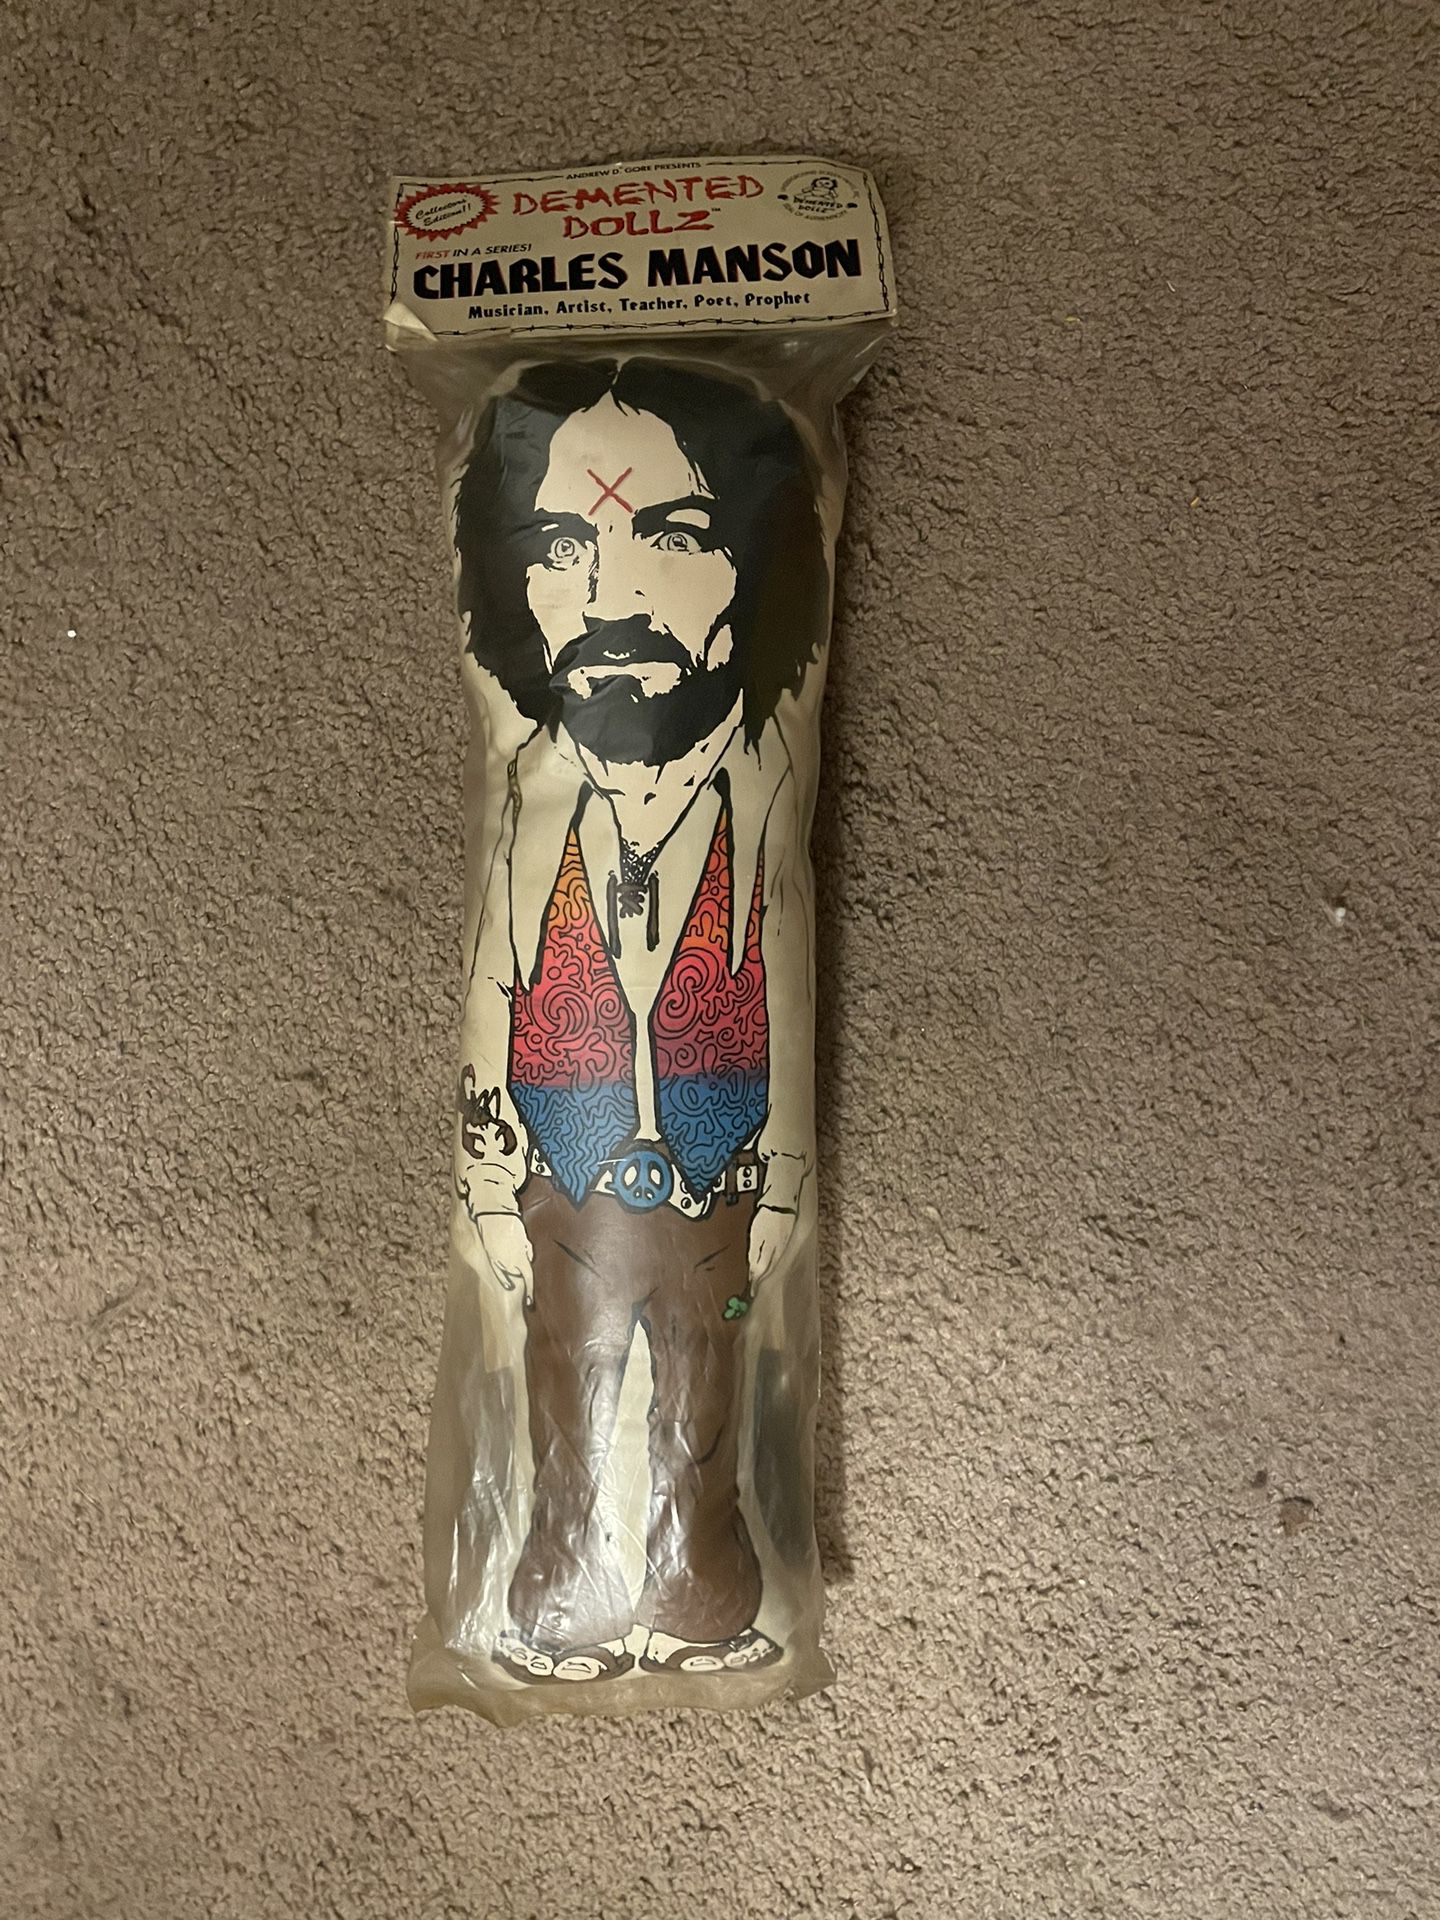 RARE VINTAGE Charles Manson Demented Dollz w/ Certificate of Authenticity (by Andrew Gore)